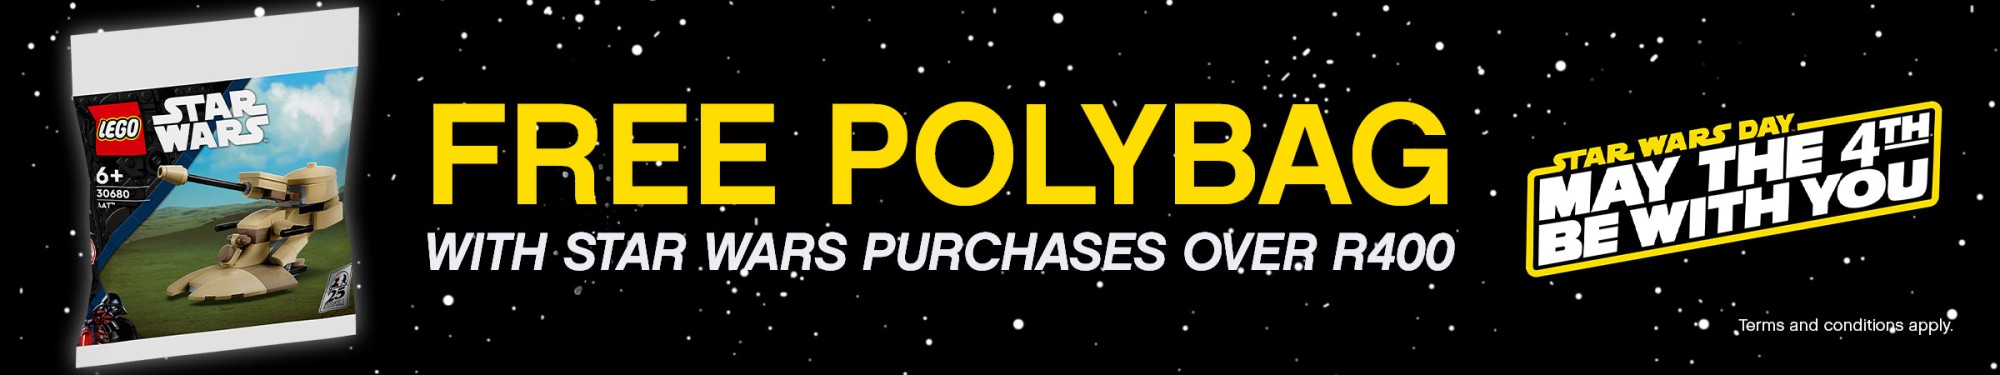 Free polybag with Star Wars purchases over R400